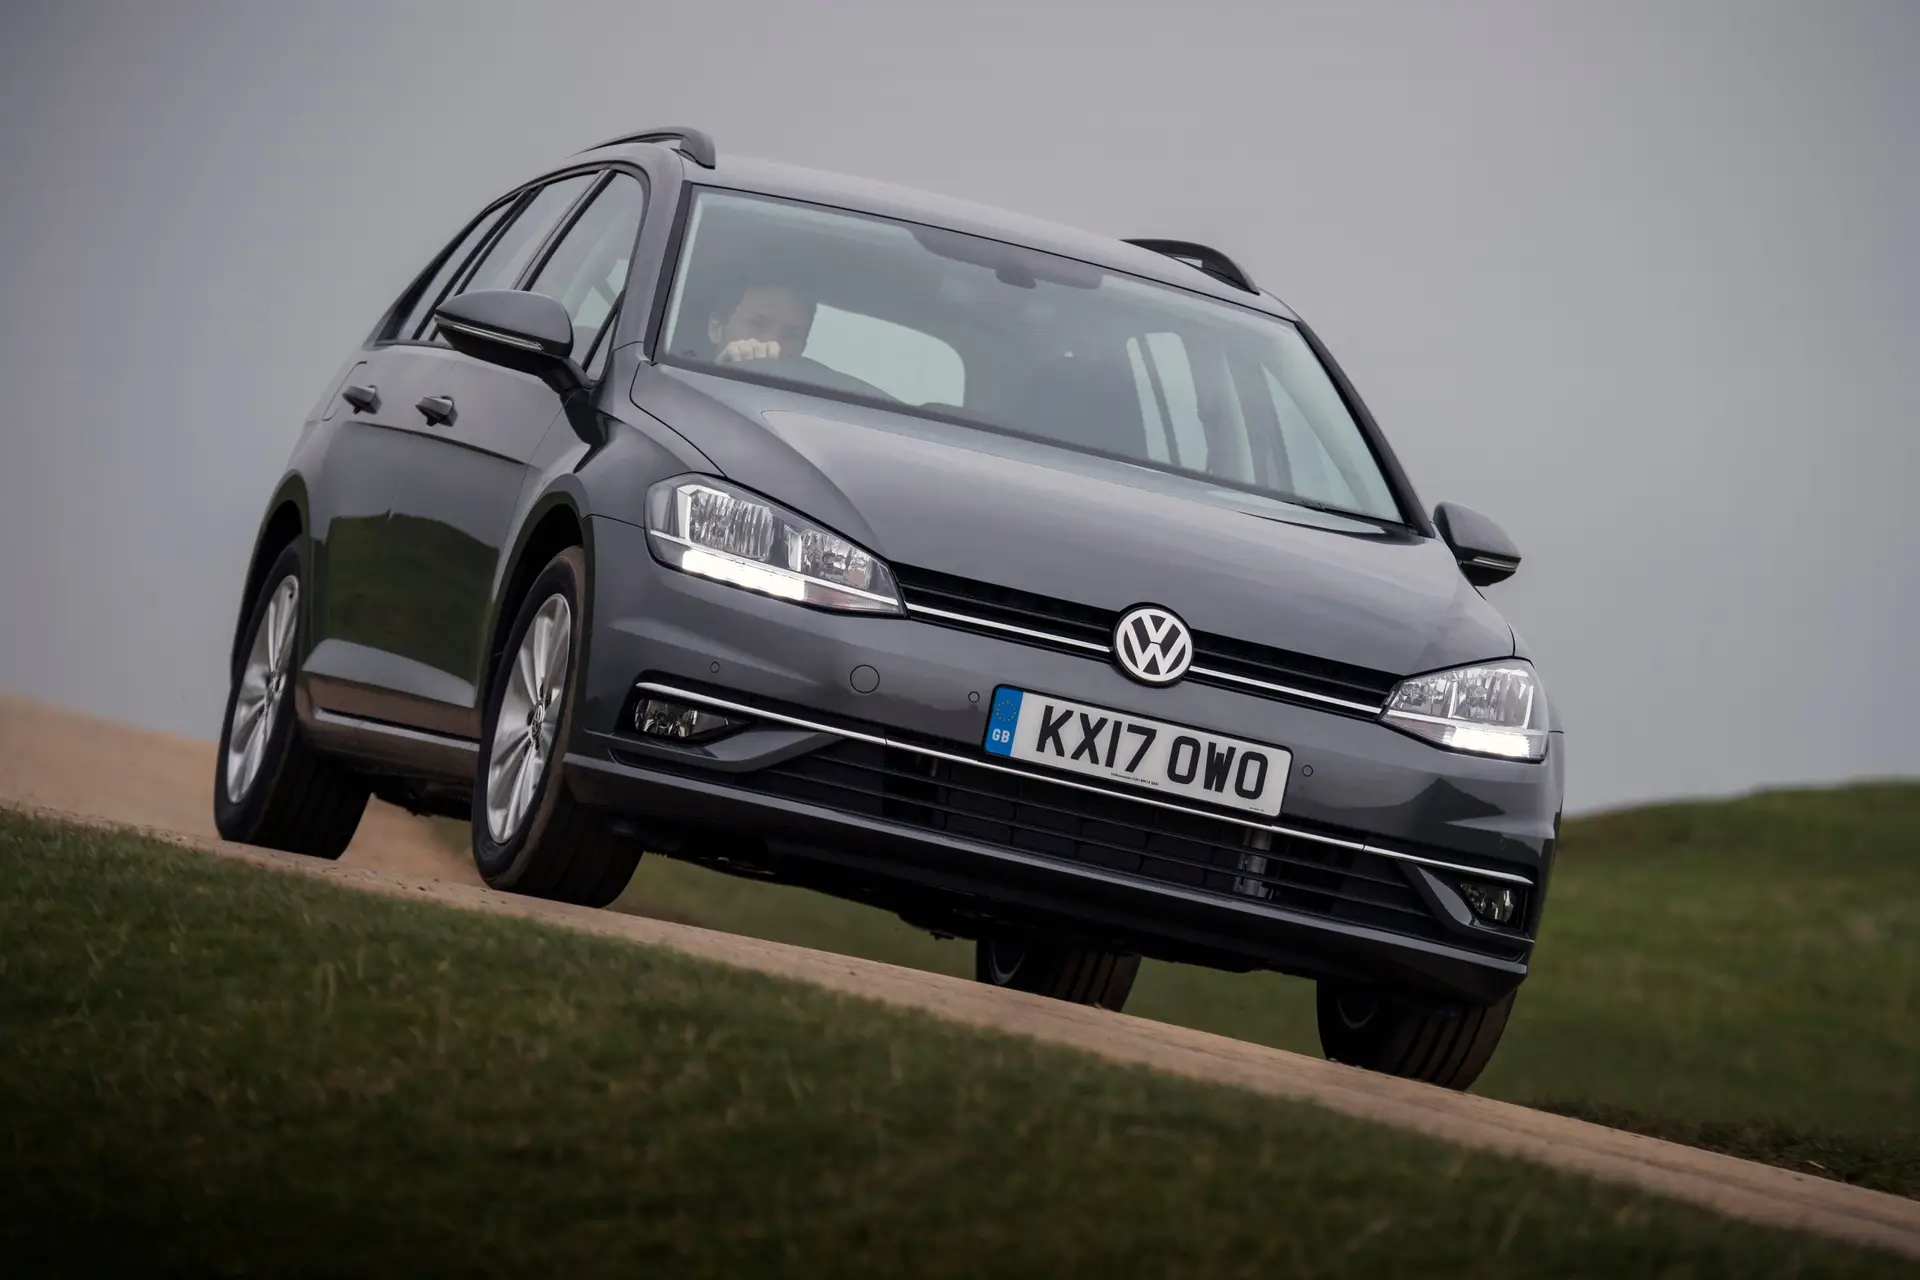 Volkswagen Golf Estate (2015-2020) Review: Exterior front three quarter photo of the Volkswagen Golf Estate on the road